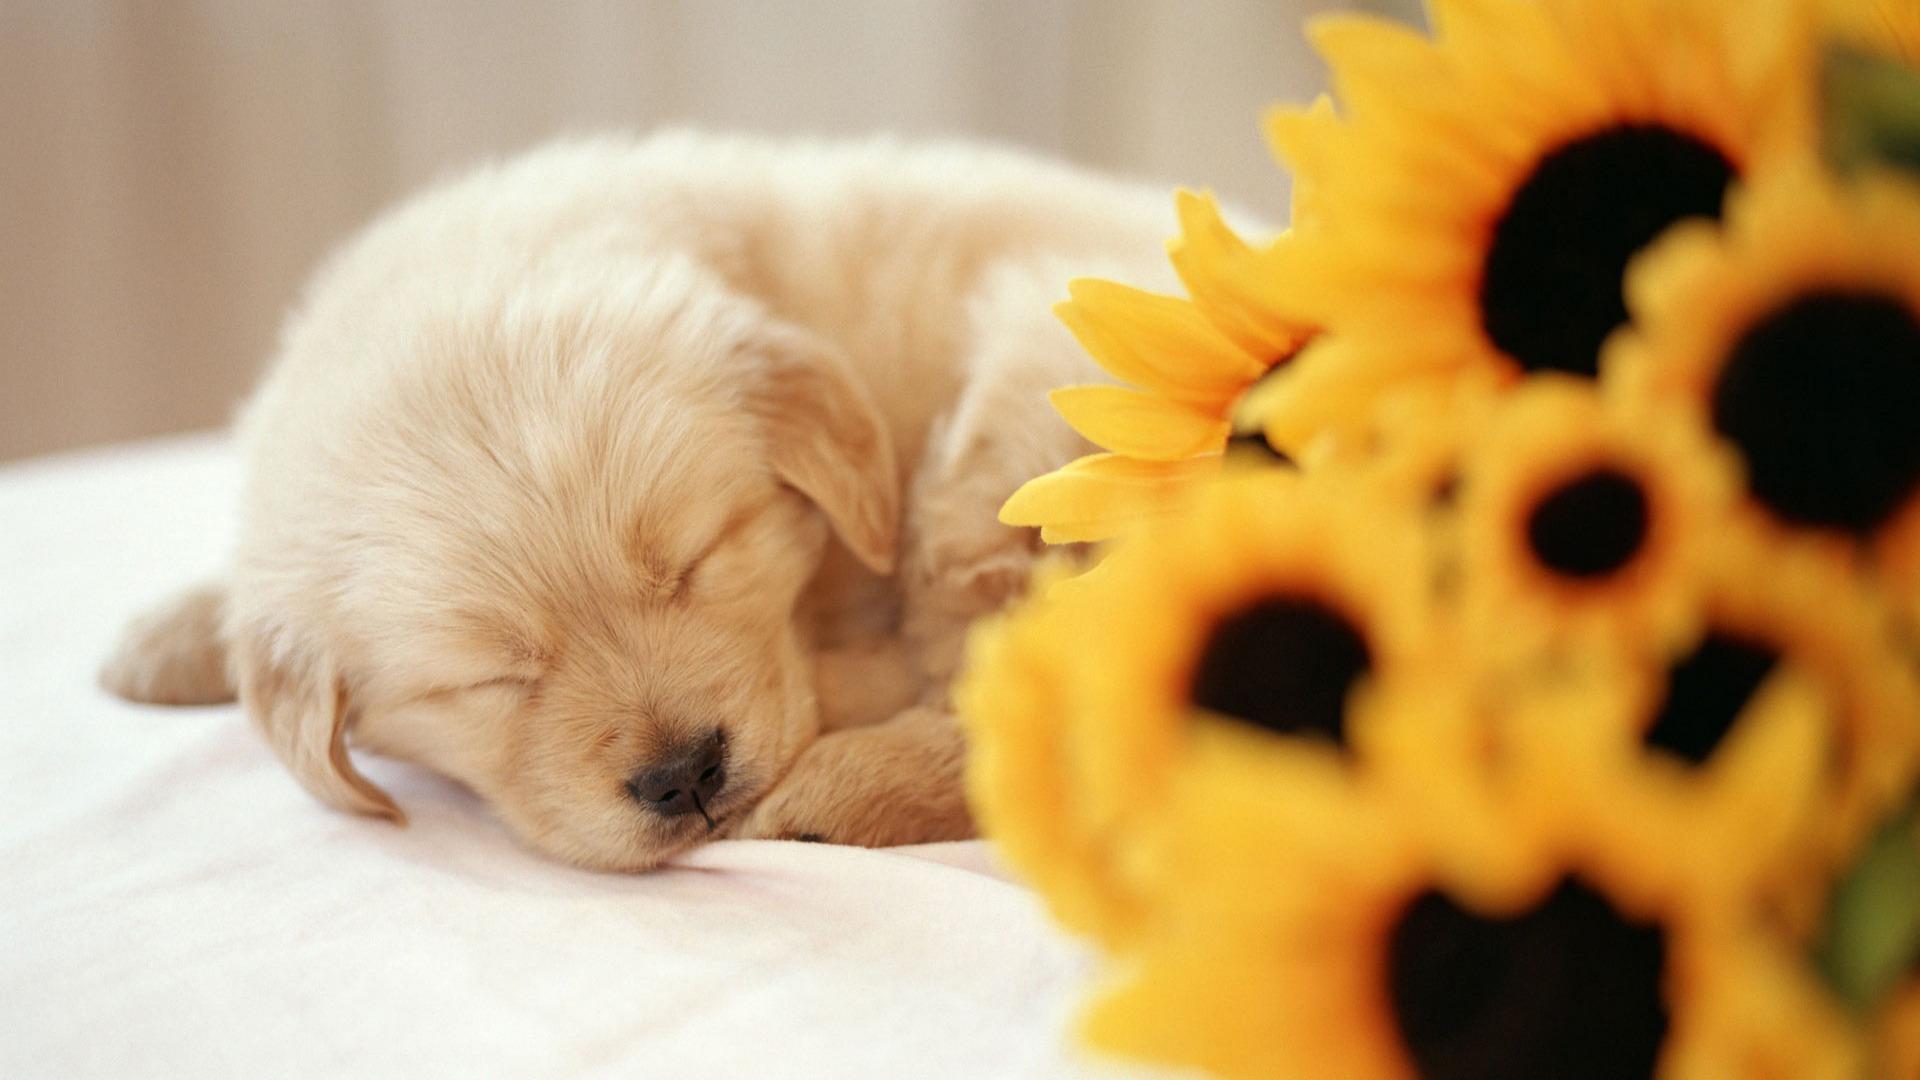 Sleeping Puppy Wallpaper Dogs Animals Wallpaper For Computer Puppies Wallpaper & Background Download